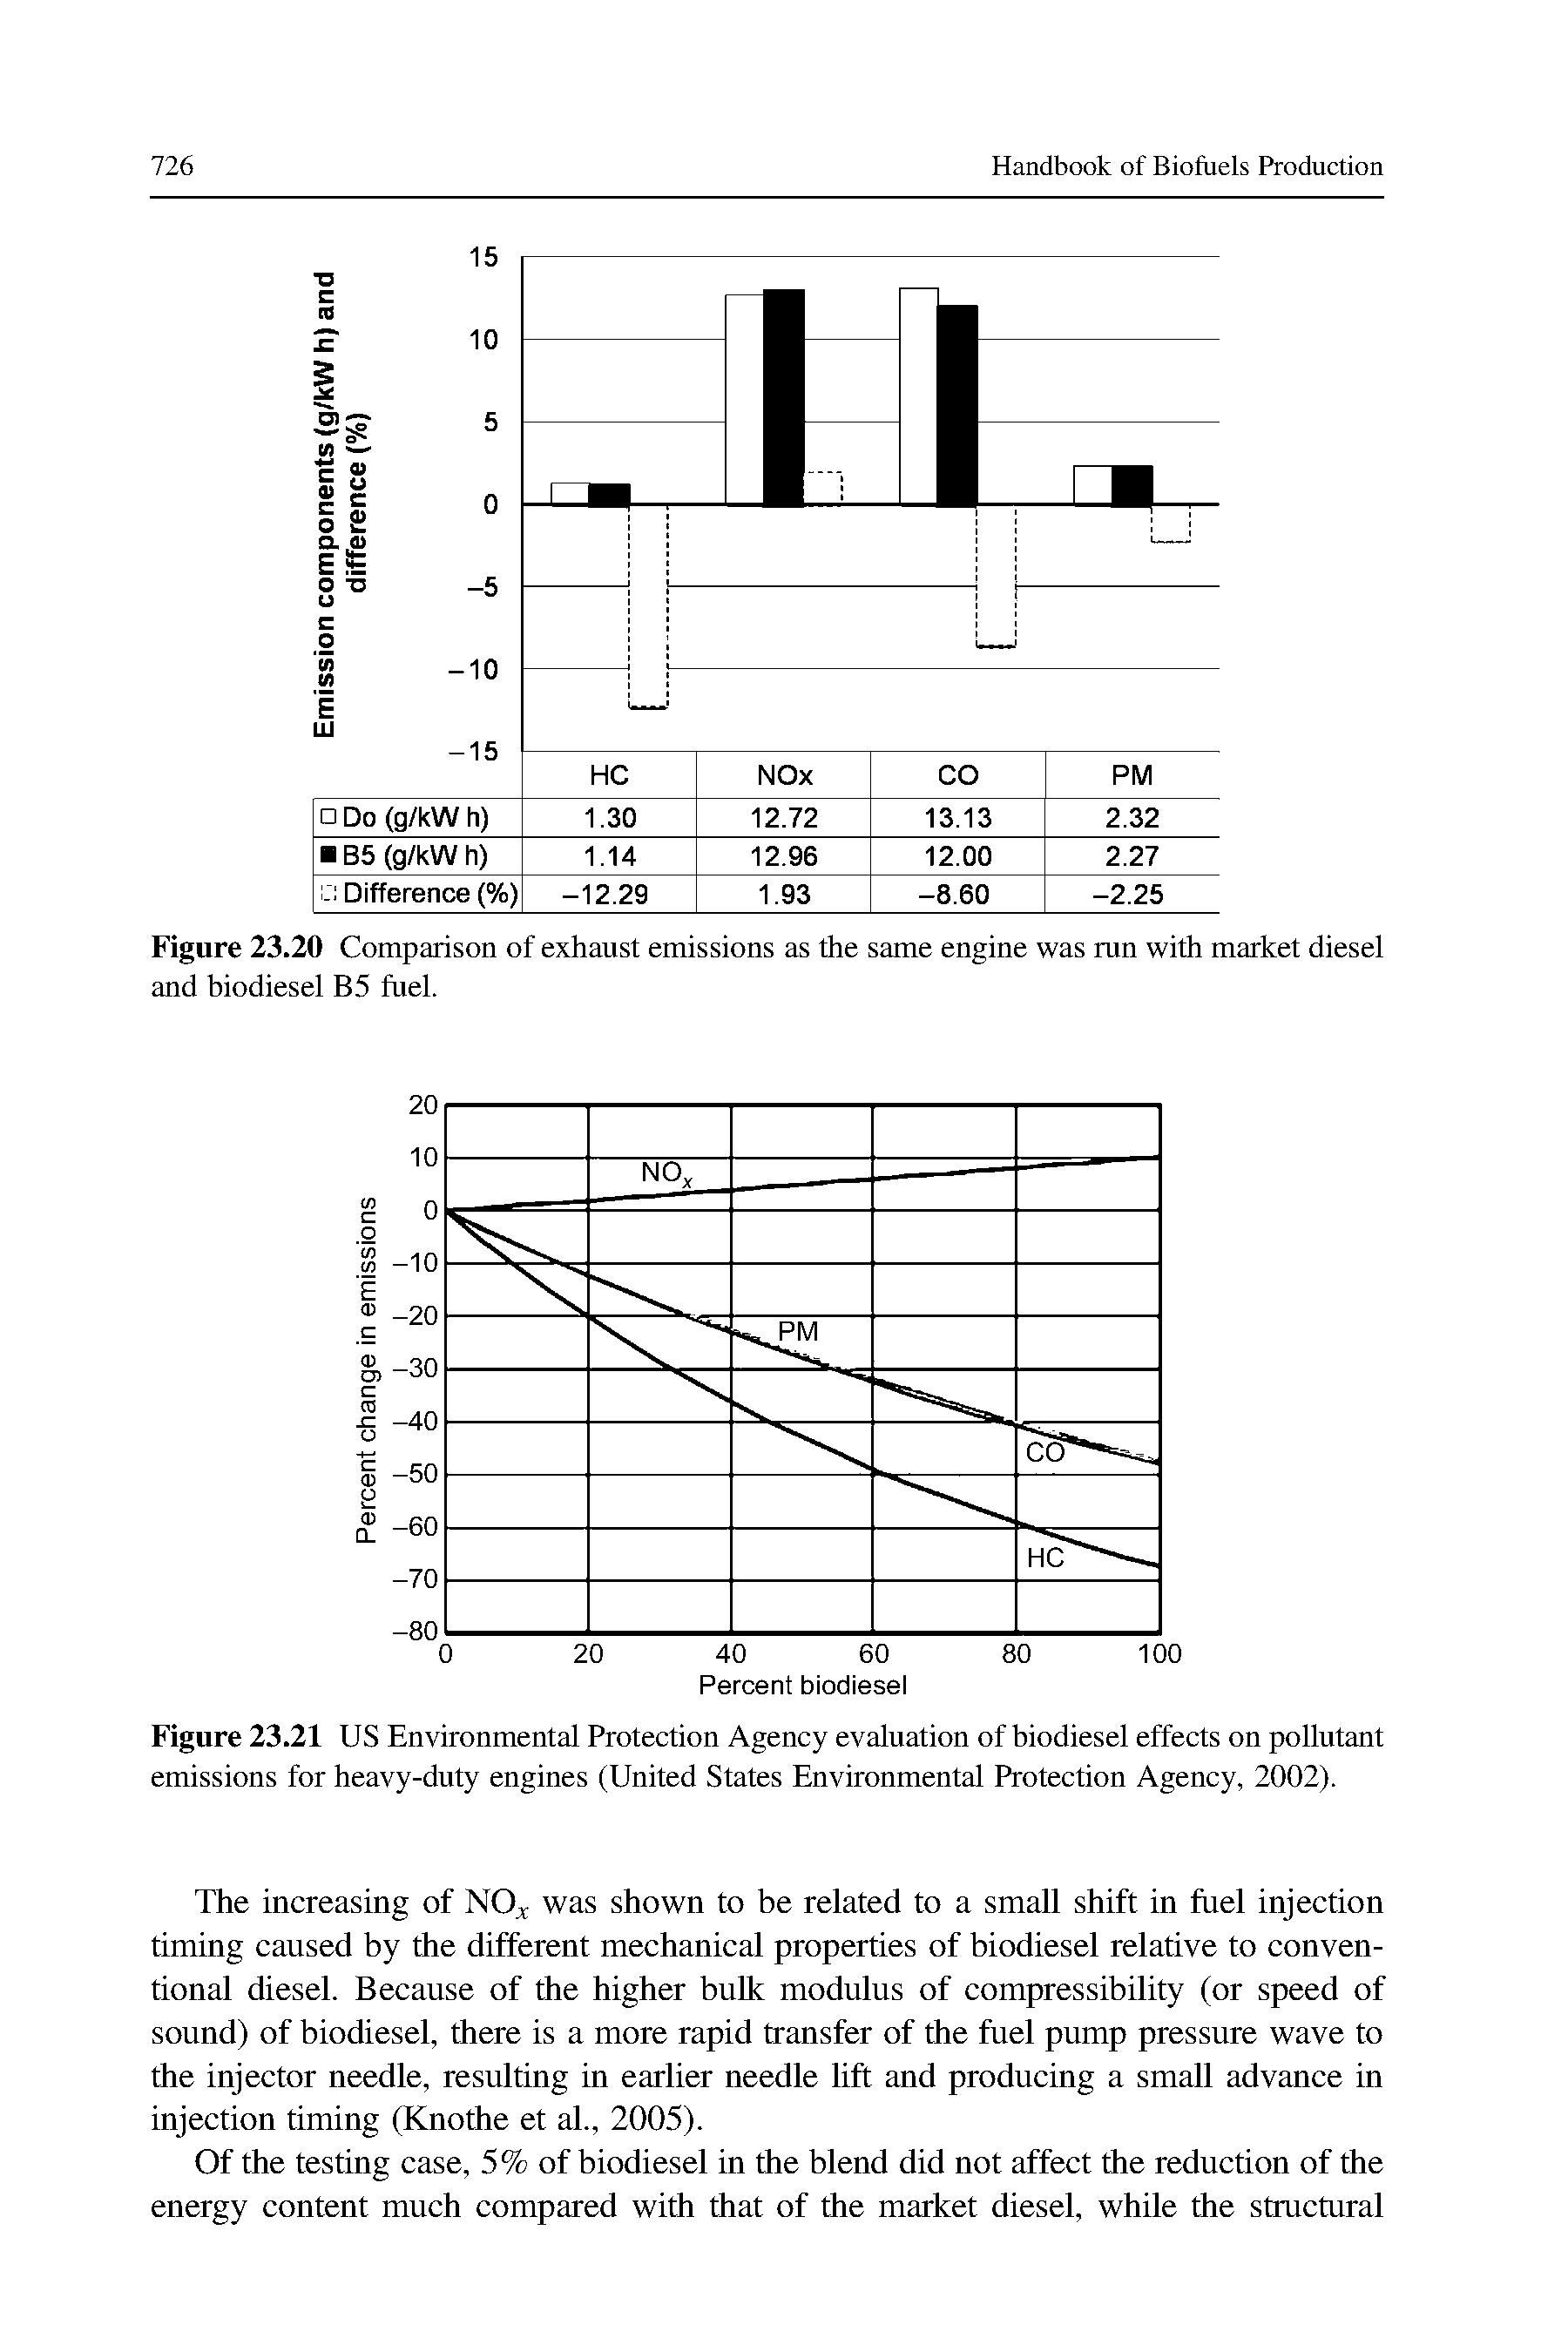 Figure 23.20 Comparison of exhaust emissions as the same engine was run with market diesel and biodiesel B5 fuel.